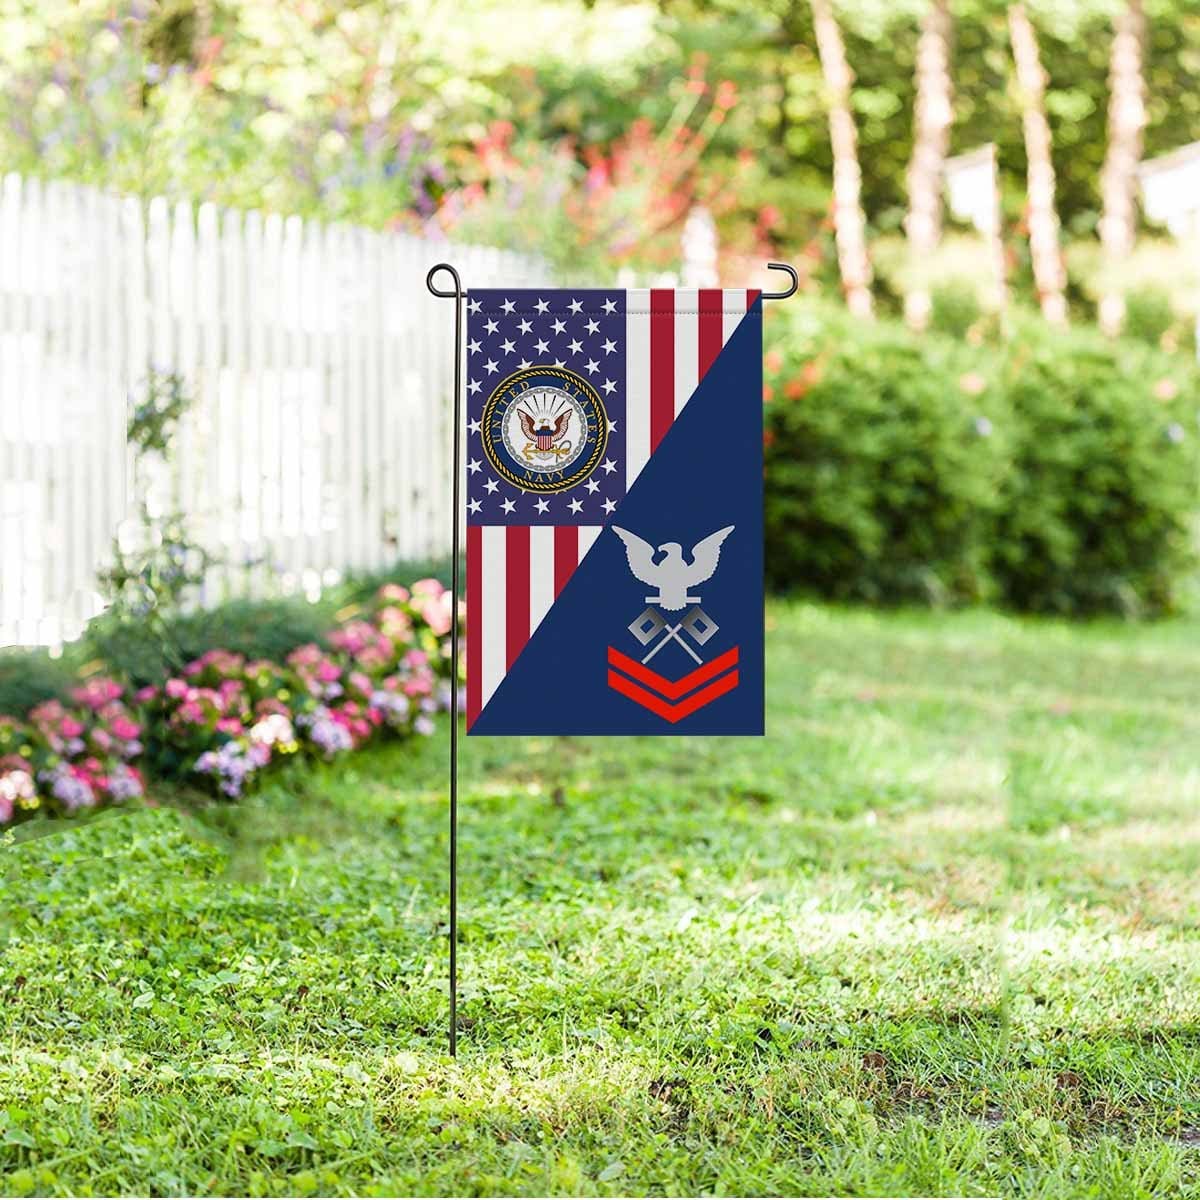 U.S Navy Signalman Navy SN E-5 Red Stripe Garden Flag/Yard Flag 12 inches x 18 inches Twin-Side Printing-GDFlag-Navy-Rating-Veterans Nation